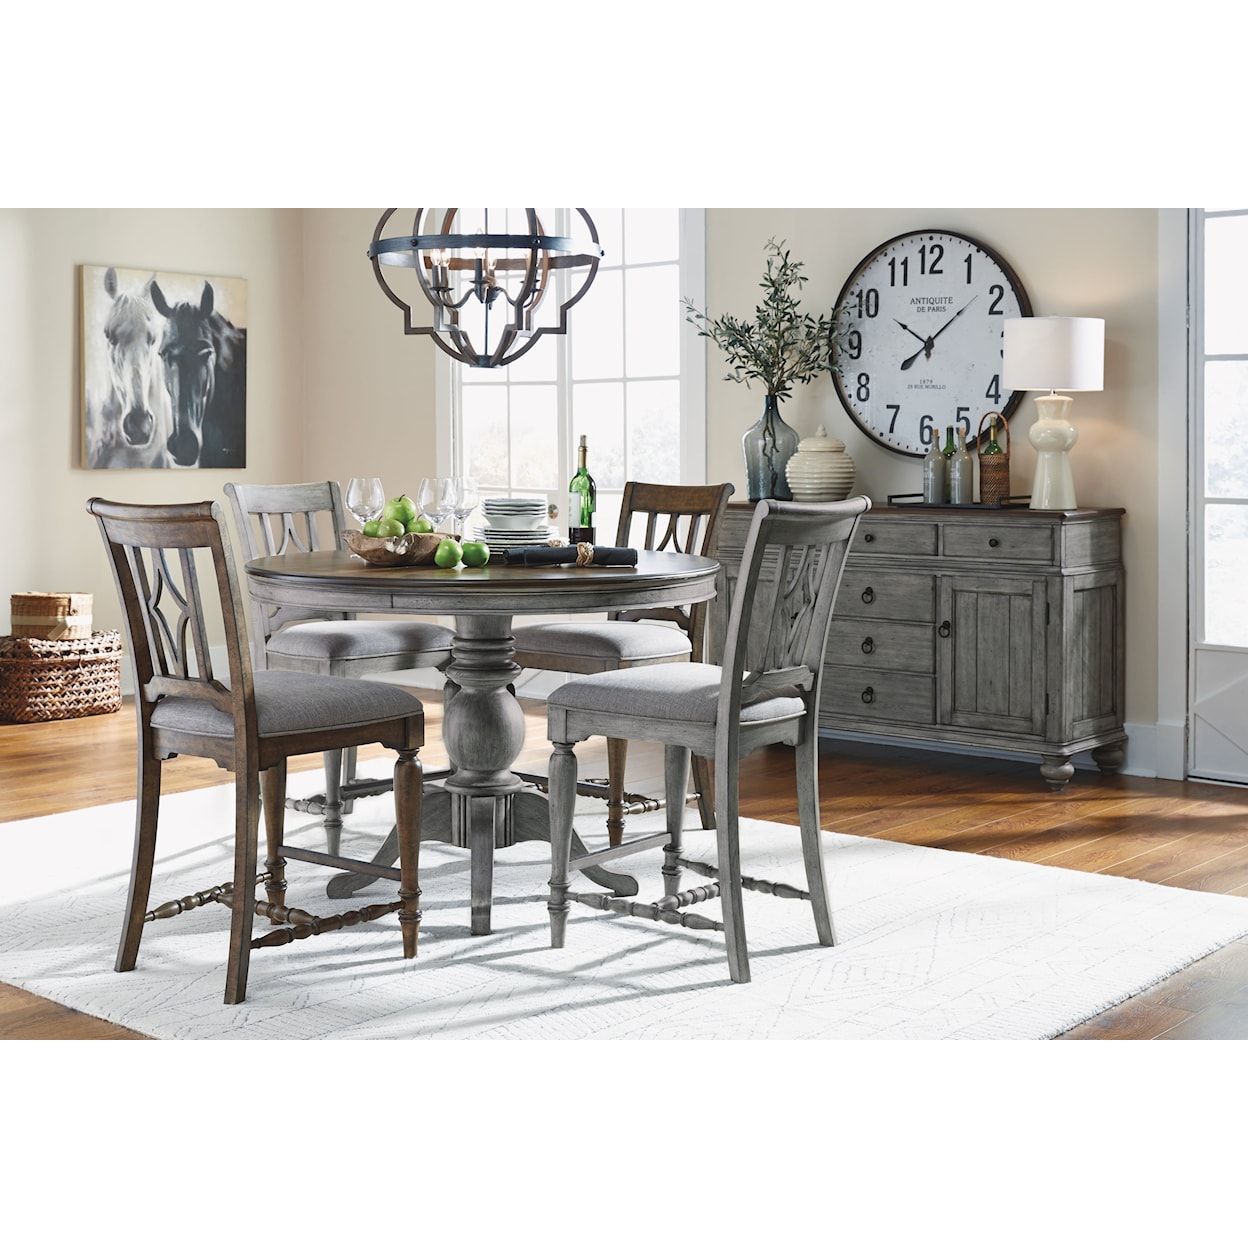 Flexsteel Wynwood Collection Plymouth 5-Piece Counter Height Table and Chair Set